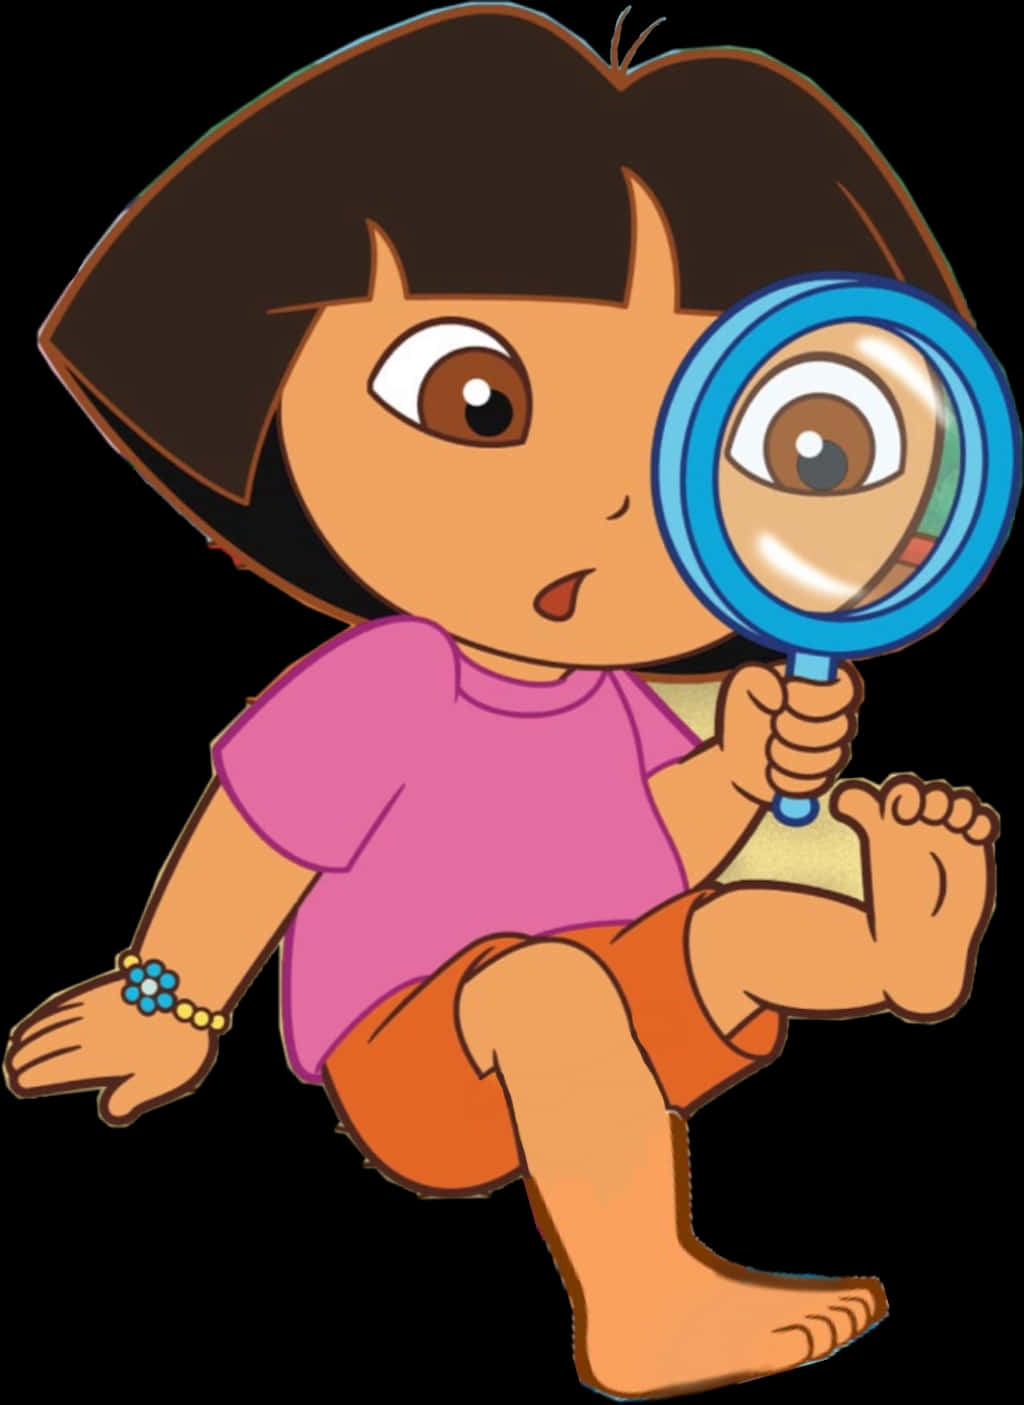 Cartoon Of A Girl Holding A Magnifying Glass